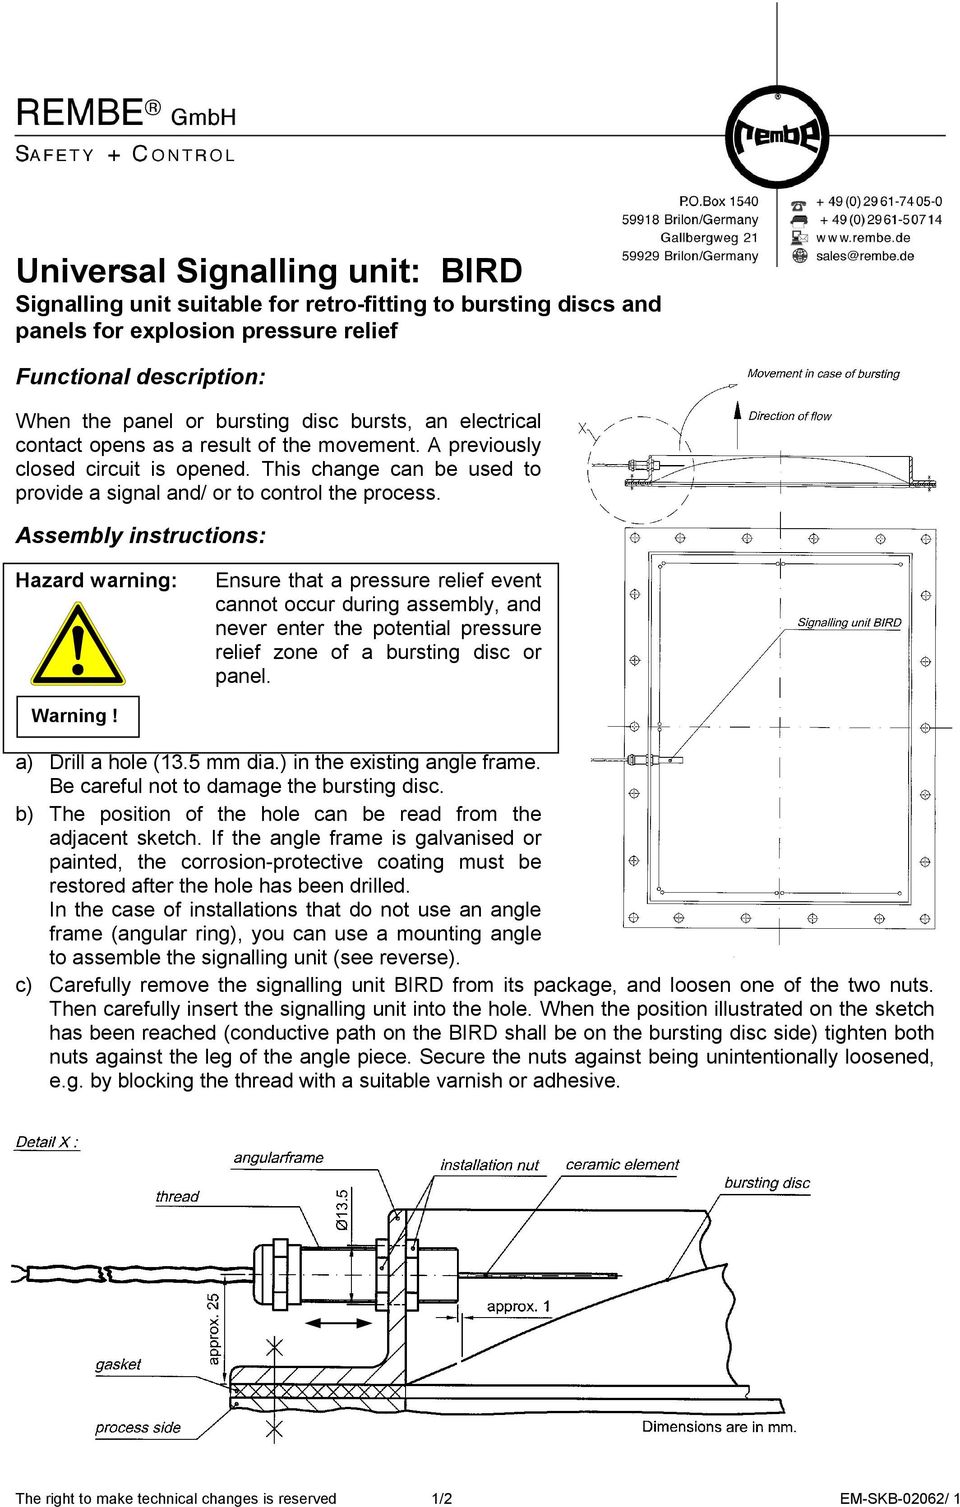 Assembly instructions: Hazard warning: Ensure that a pressure relief event cannot occur during assembly, and never enter the potential pressure relief zone of a bursting disc or panel. Warning!